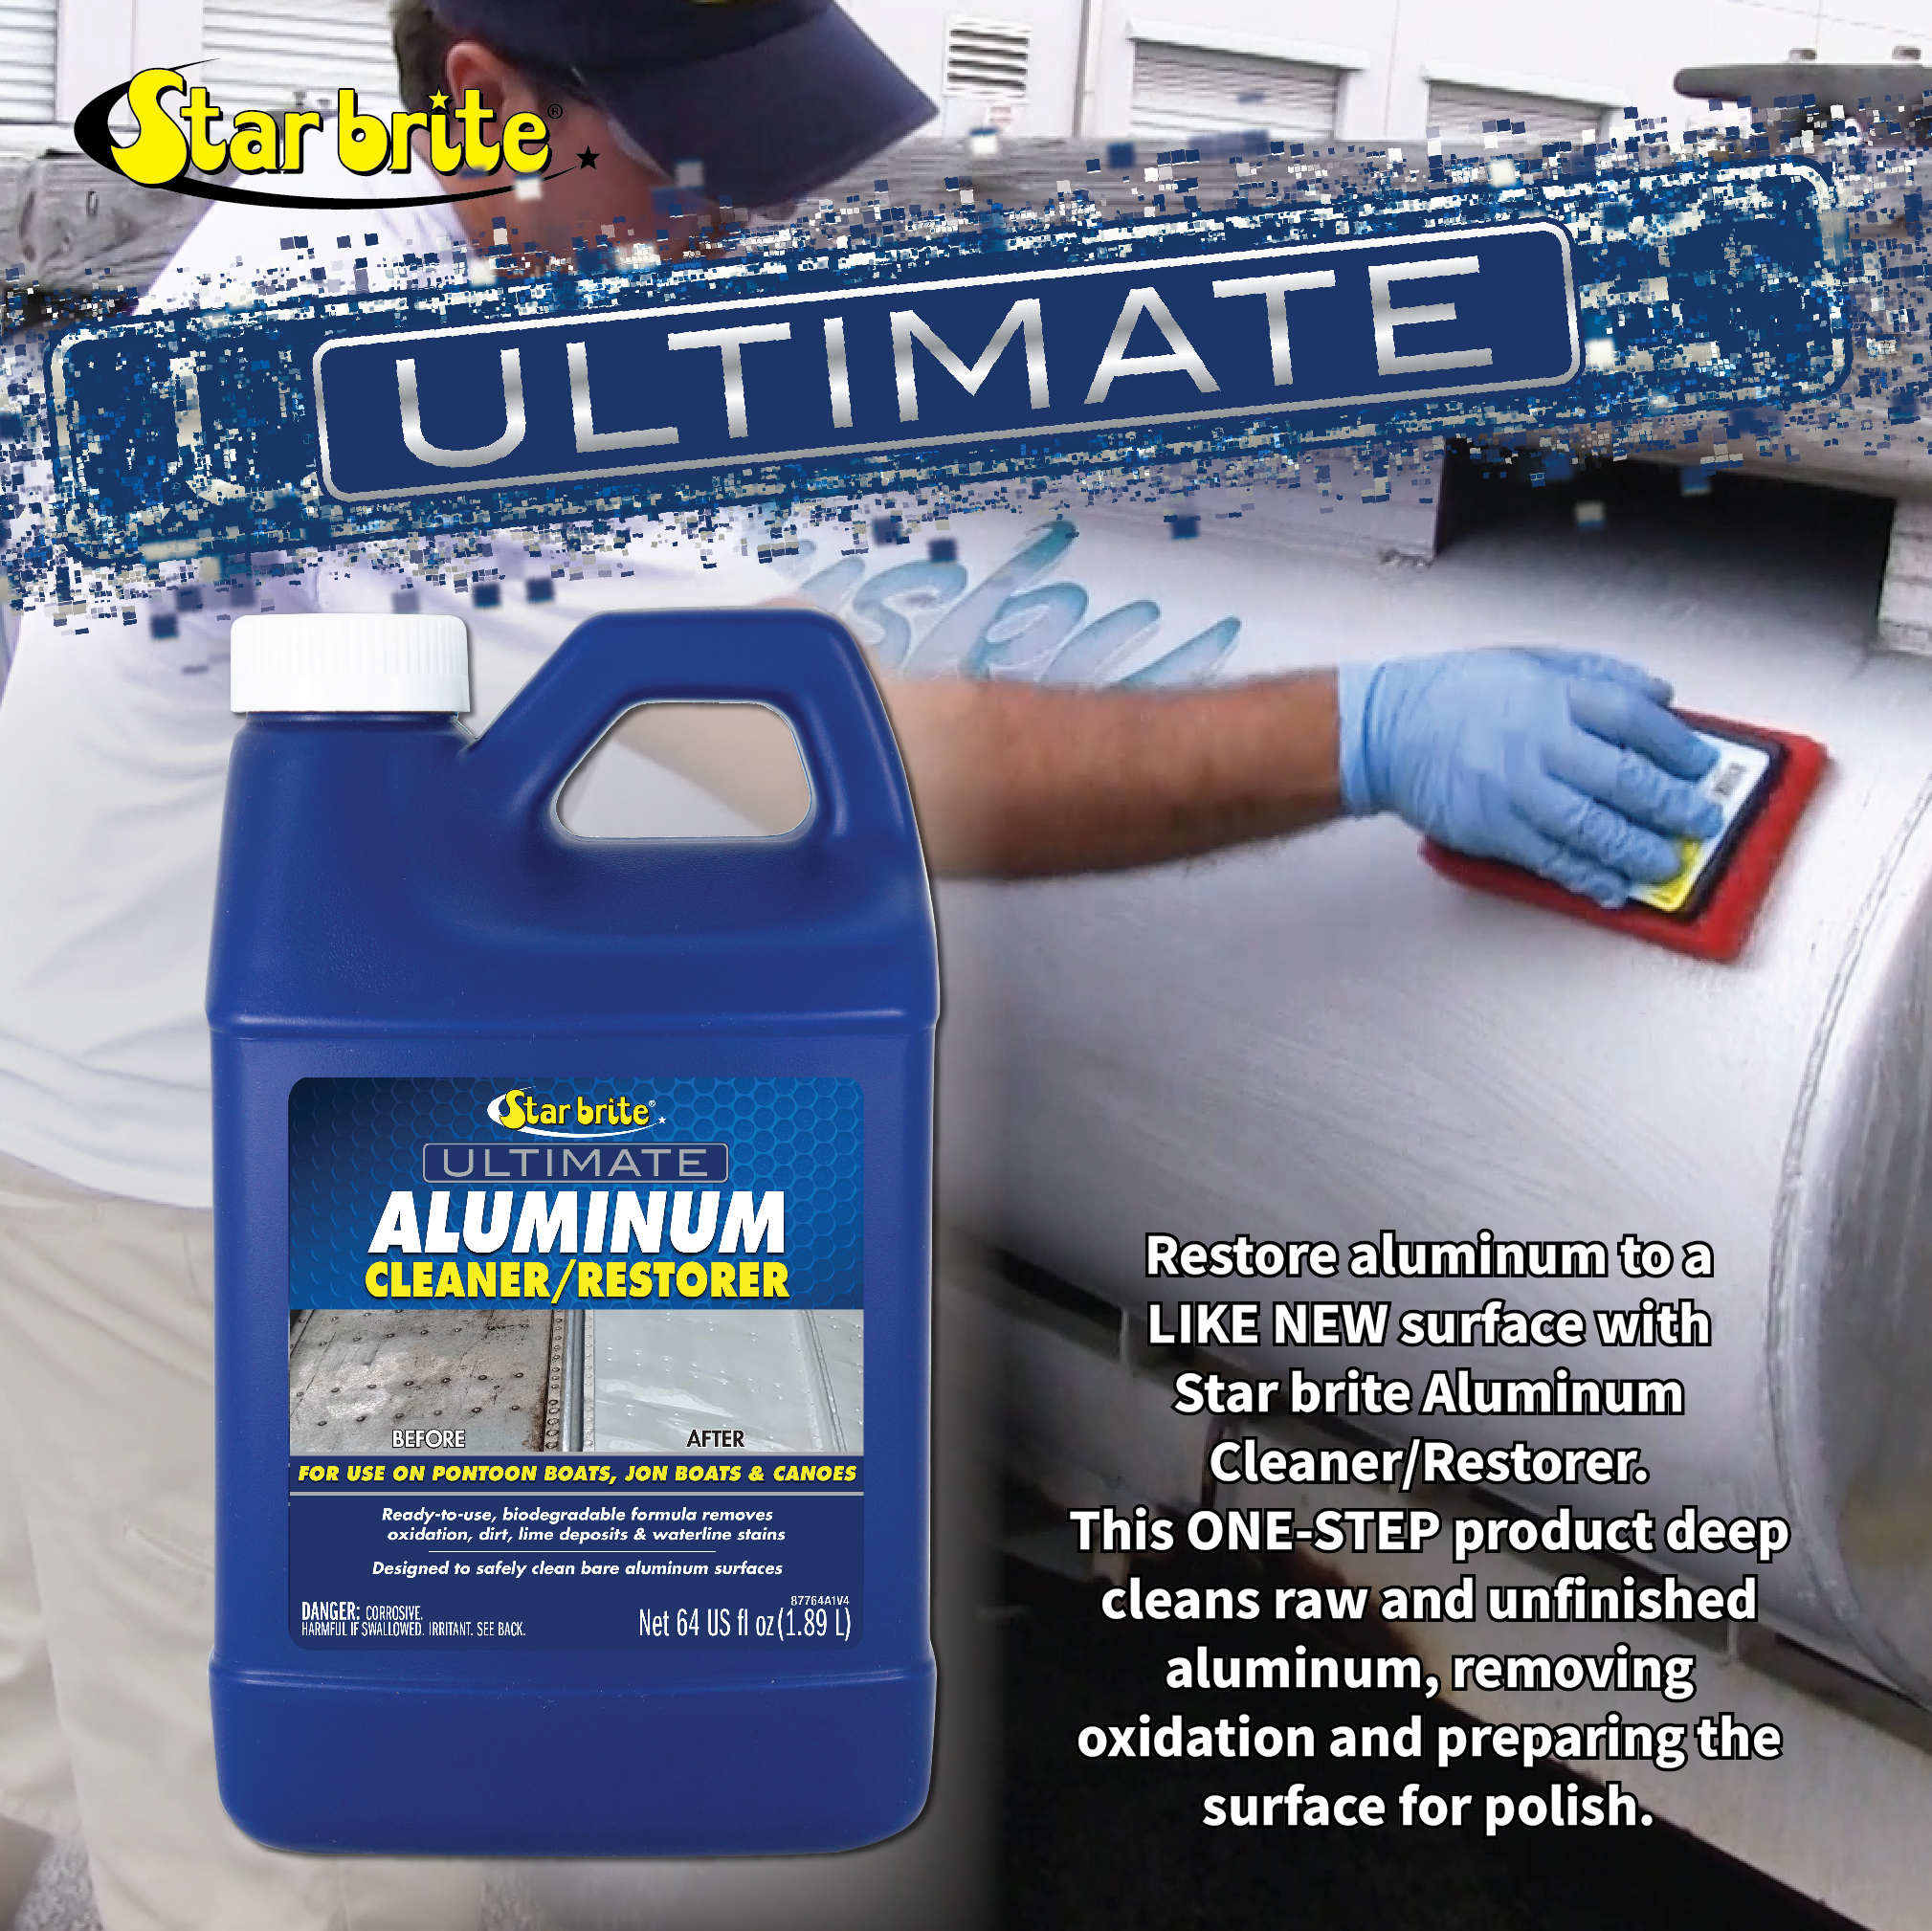 STAR BRITE Ultimate Aluminum Cleaner & Restorer - Aluminum Boat Cleaner - Perfect for Pontoon Boats, Jon Boats & Canoes (NO SPRAYER) - 64 OZ (087764) - image 3 of 4